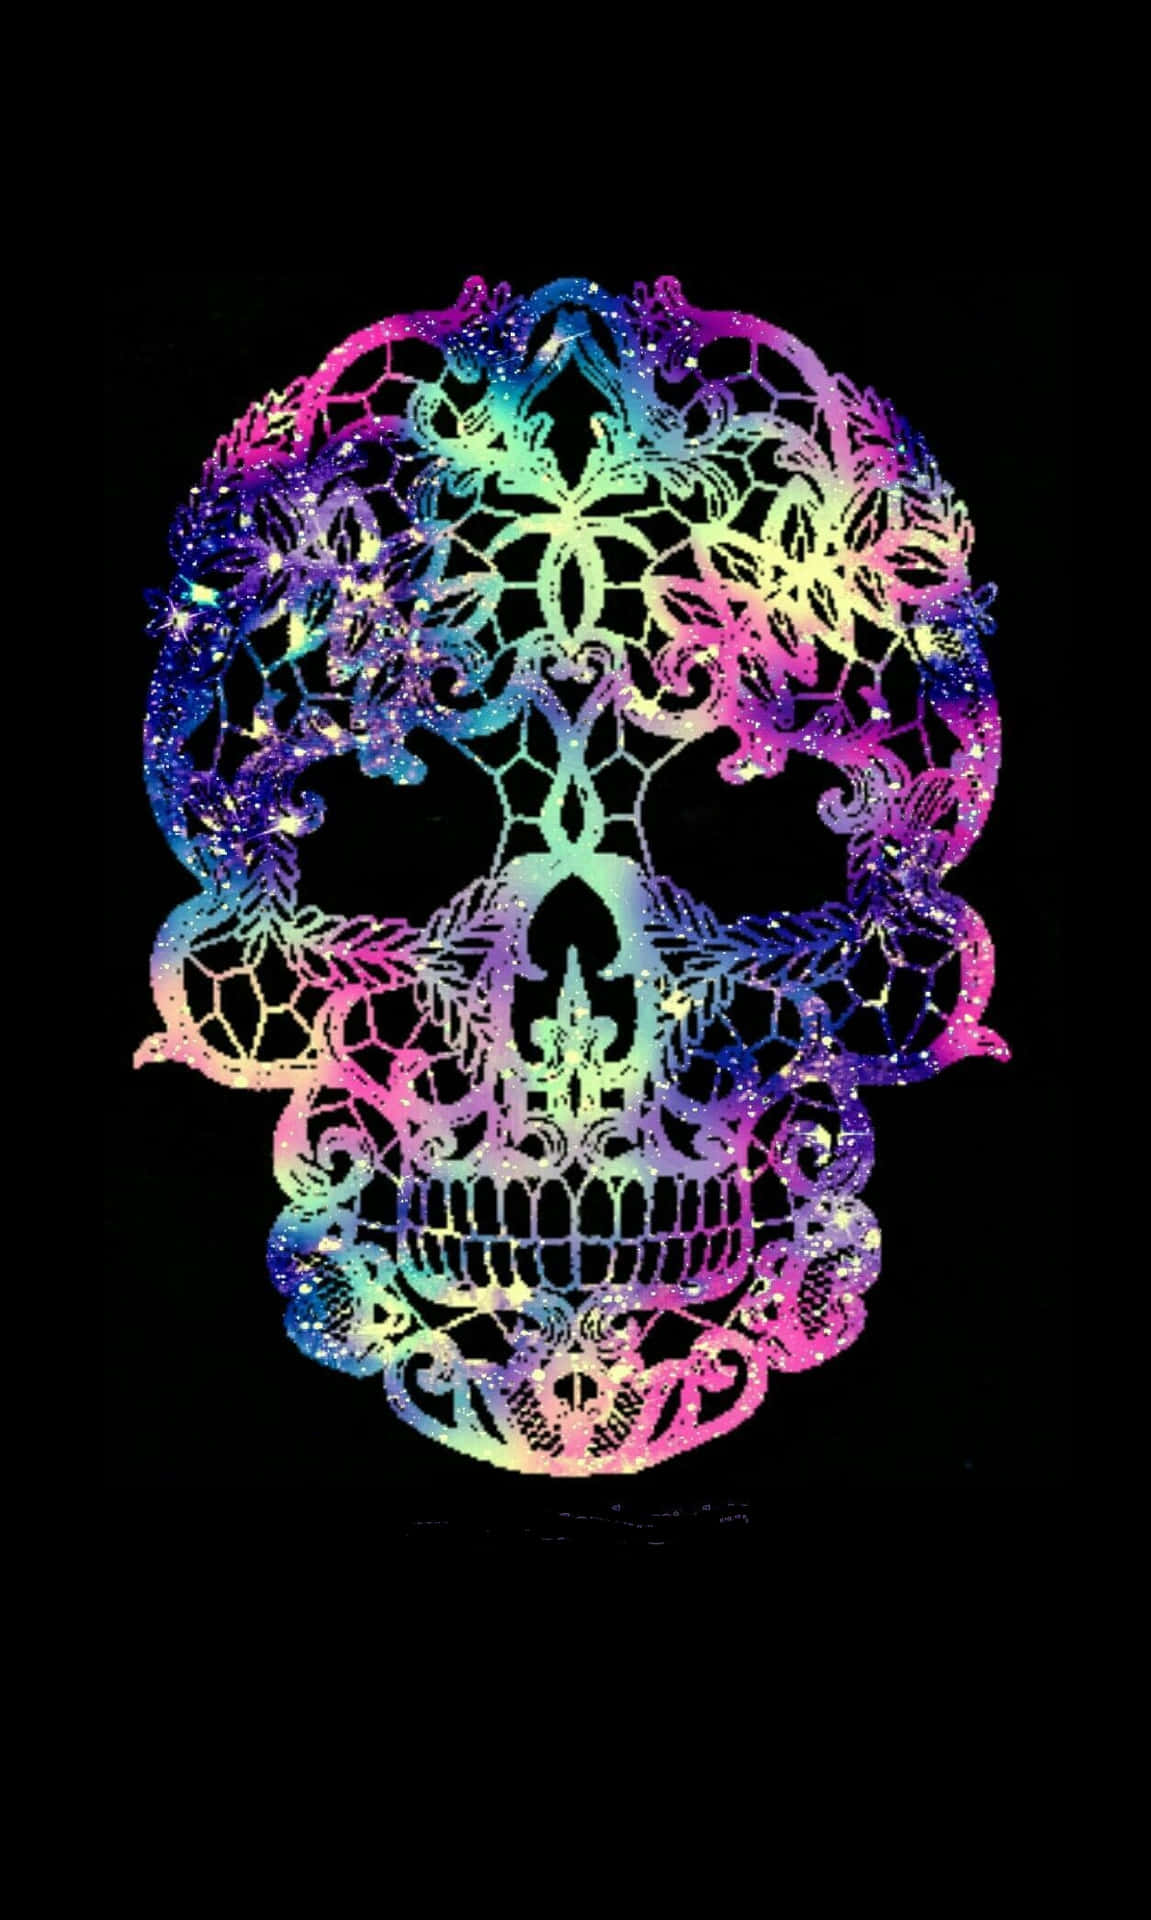 Bringing the beauty of Mexico to you with the amazing Sugar Skull Phone! Wallpaper